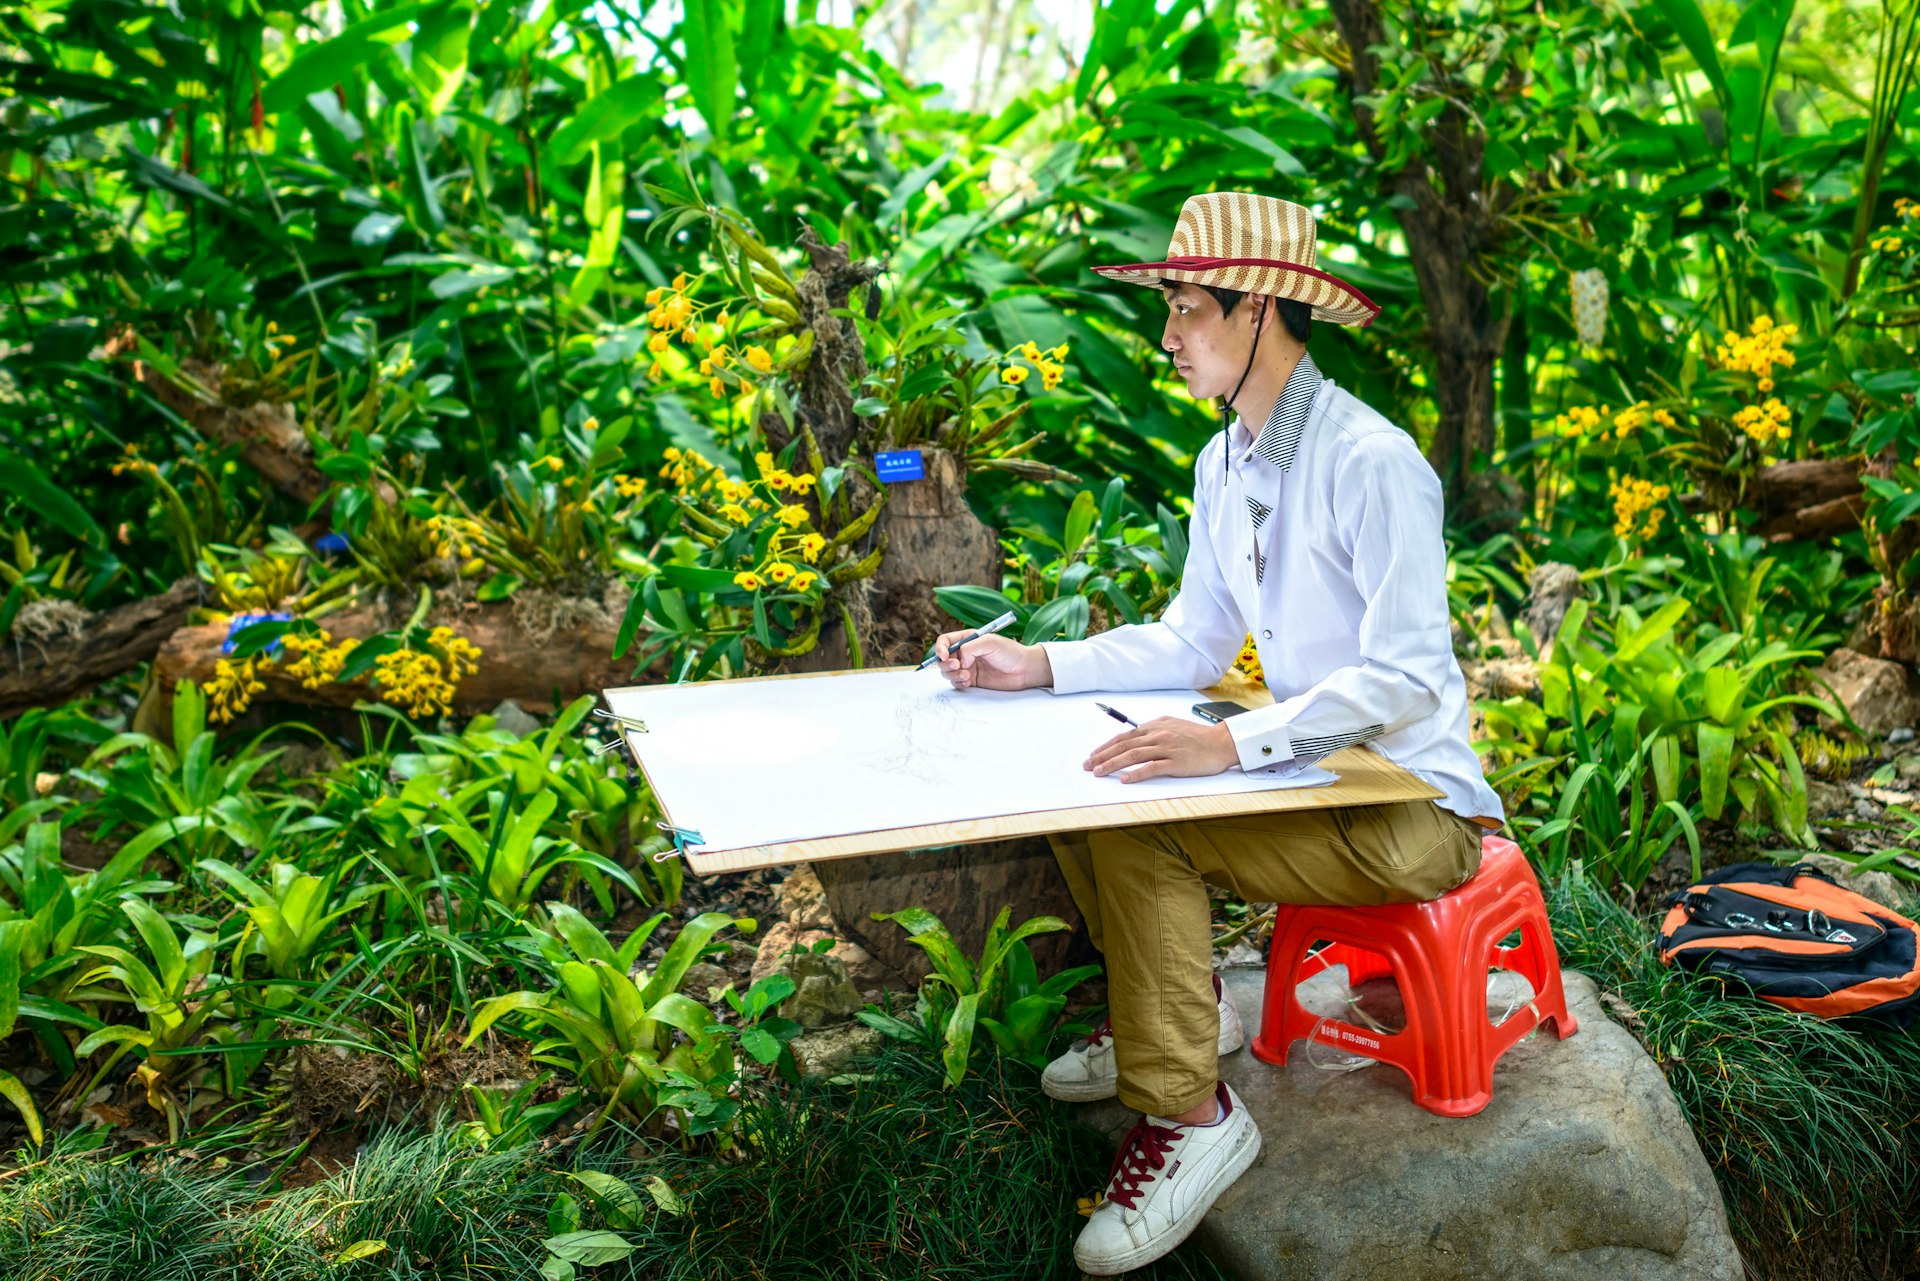 A young man painting sketch in Xishuangbanna Tropical Botanical Garden, Chinese Academy of Sciences. Located in Menglun Town, Mengla County, Yunnan Province, China.